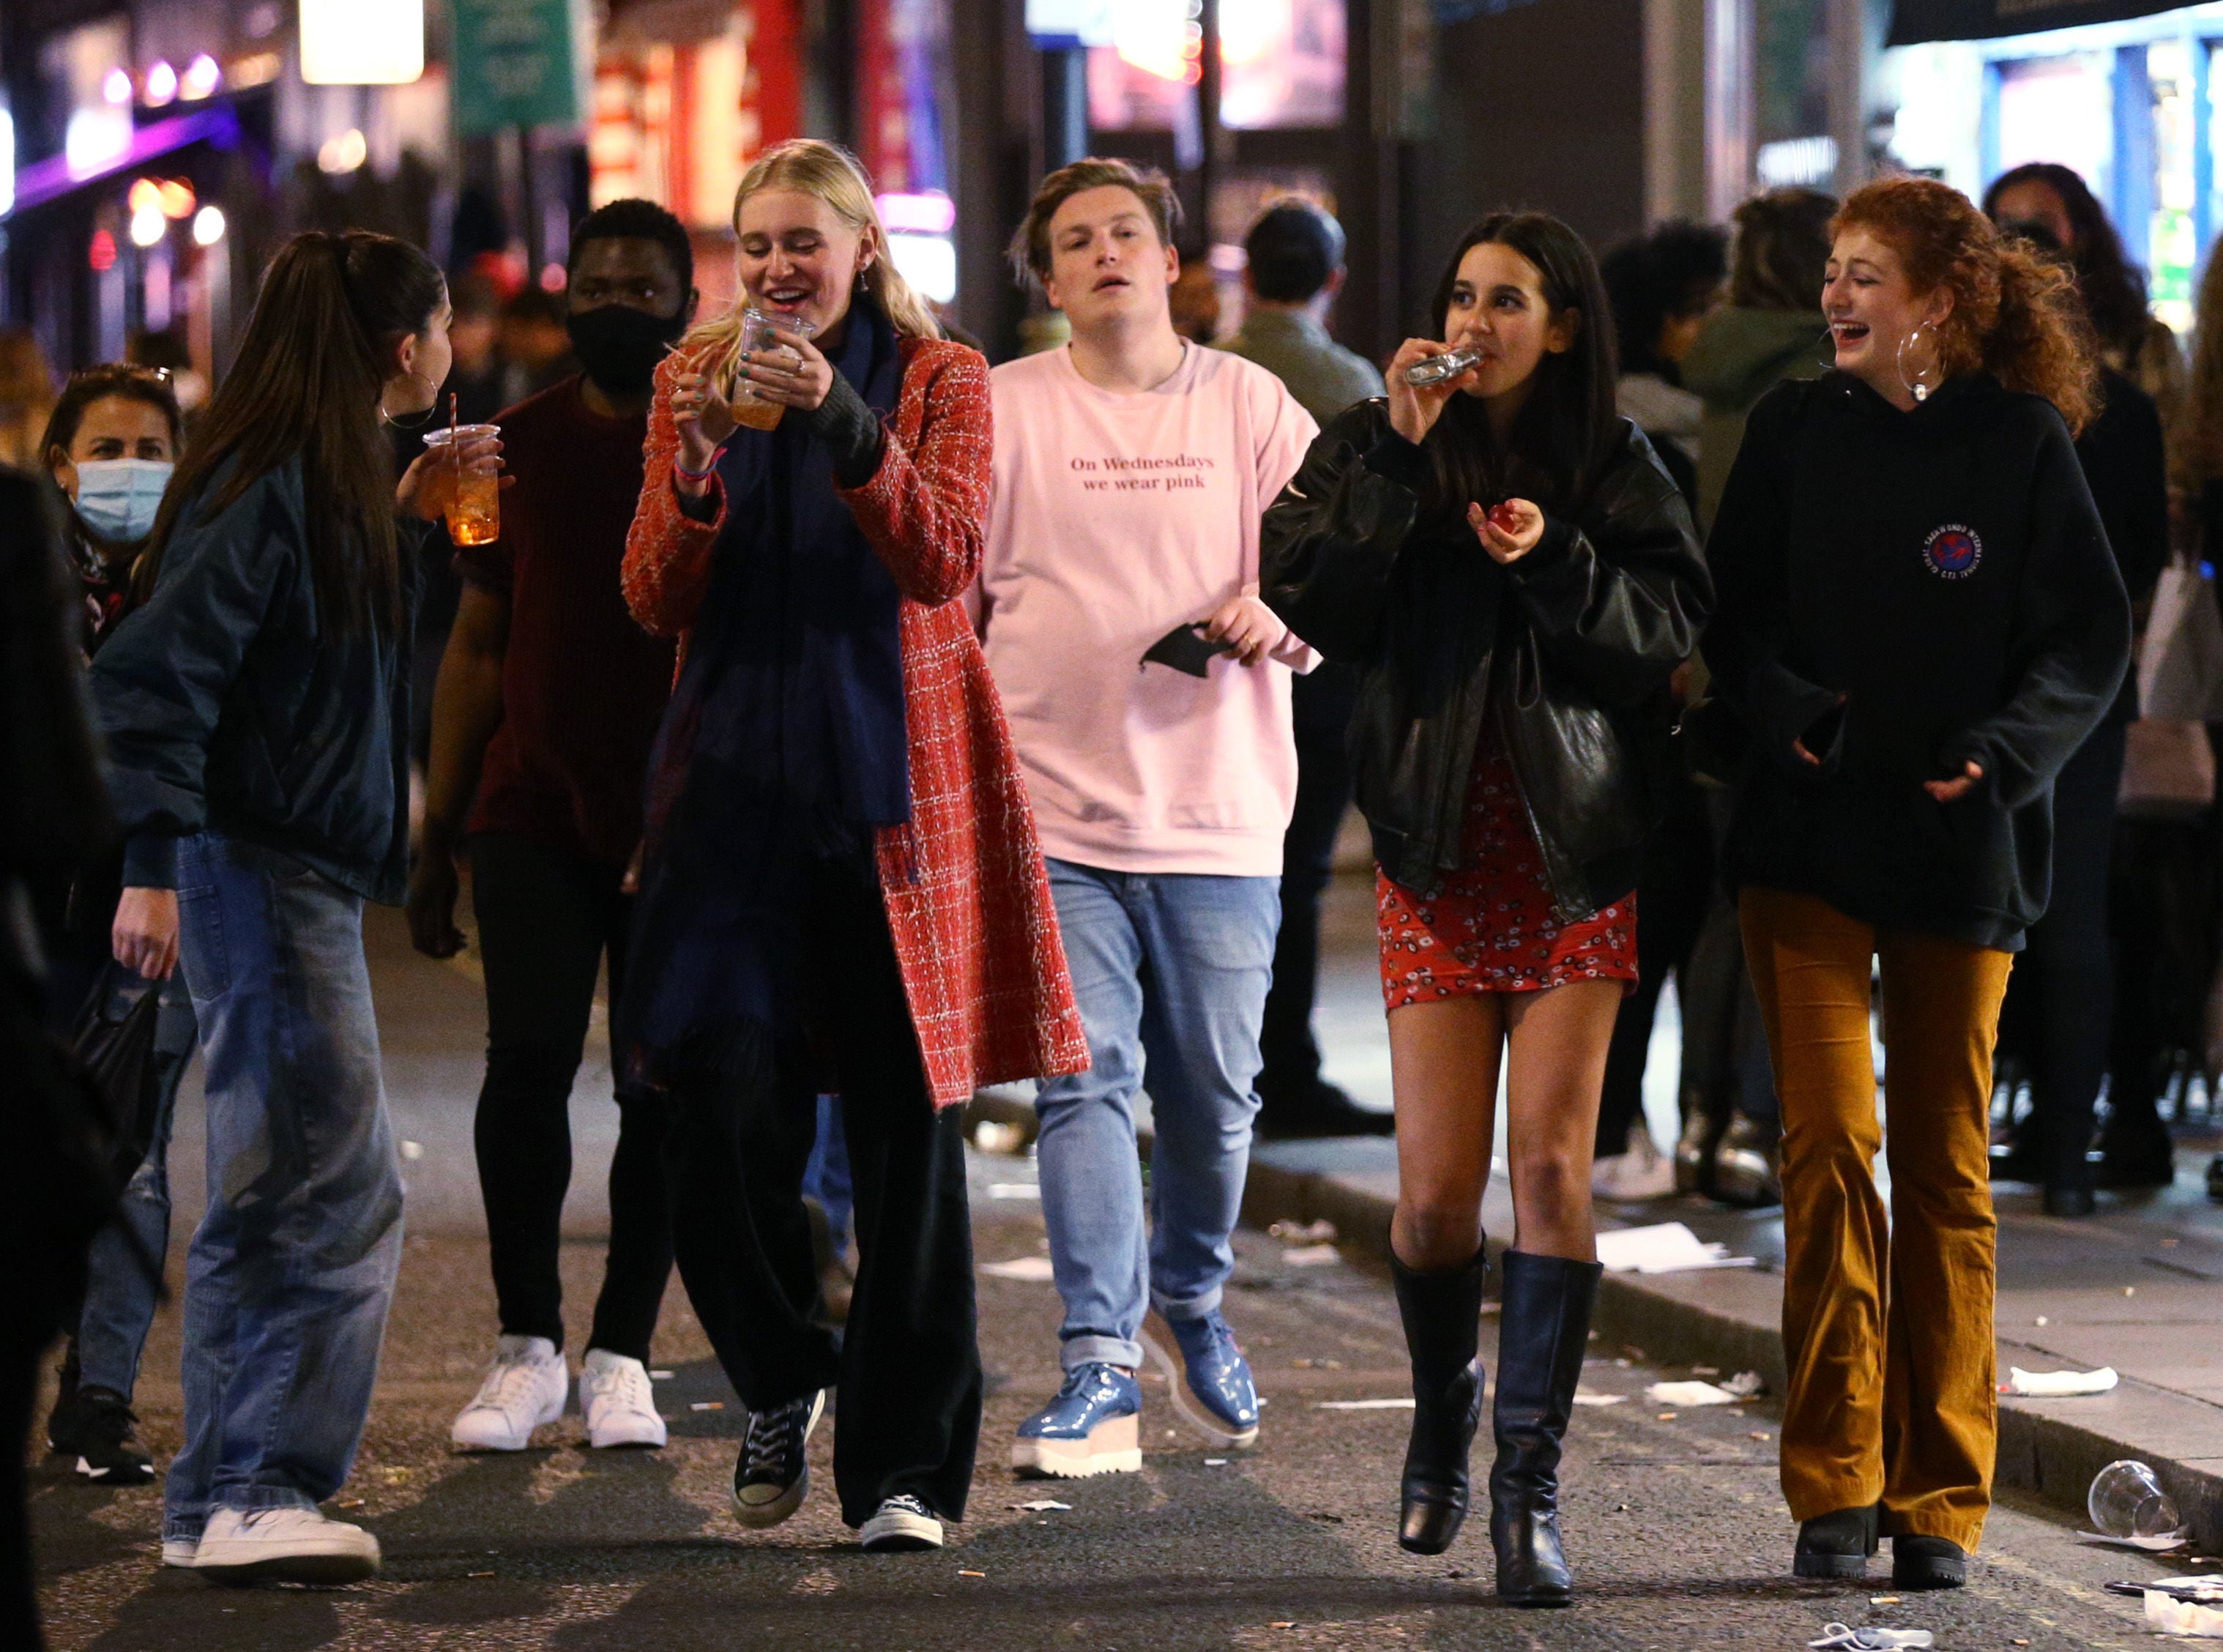 Revellers following the 10pm curfew in London